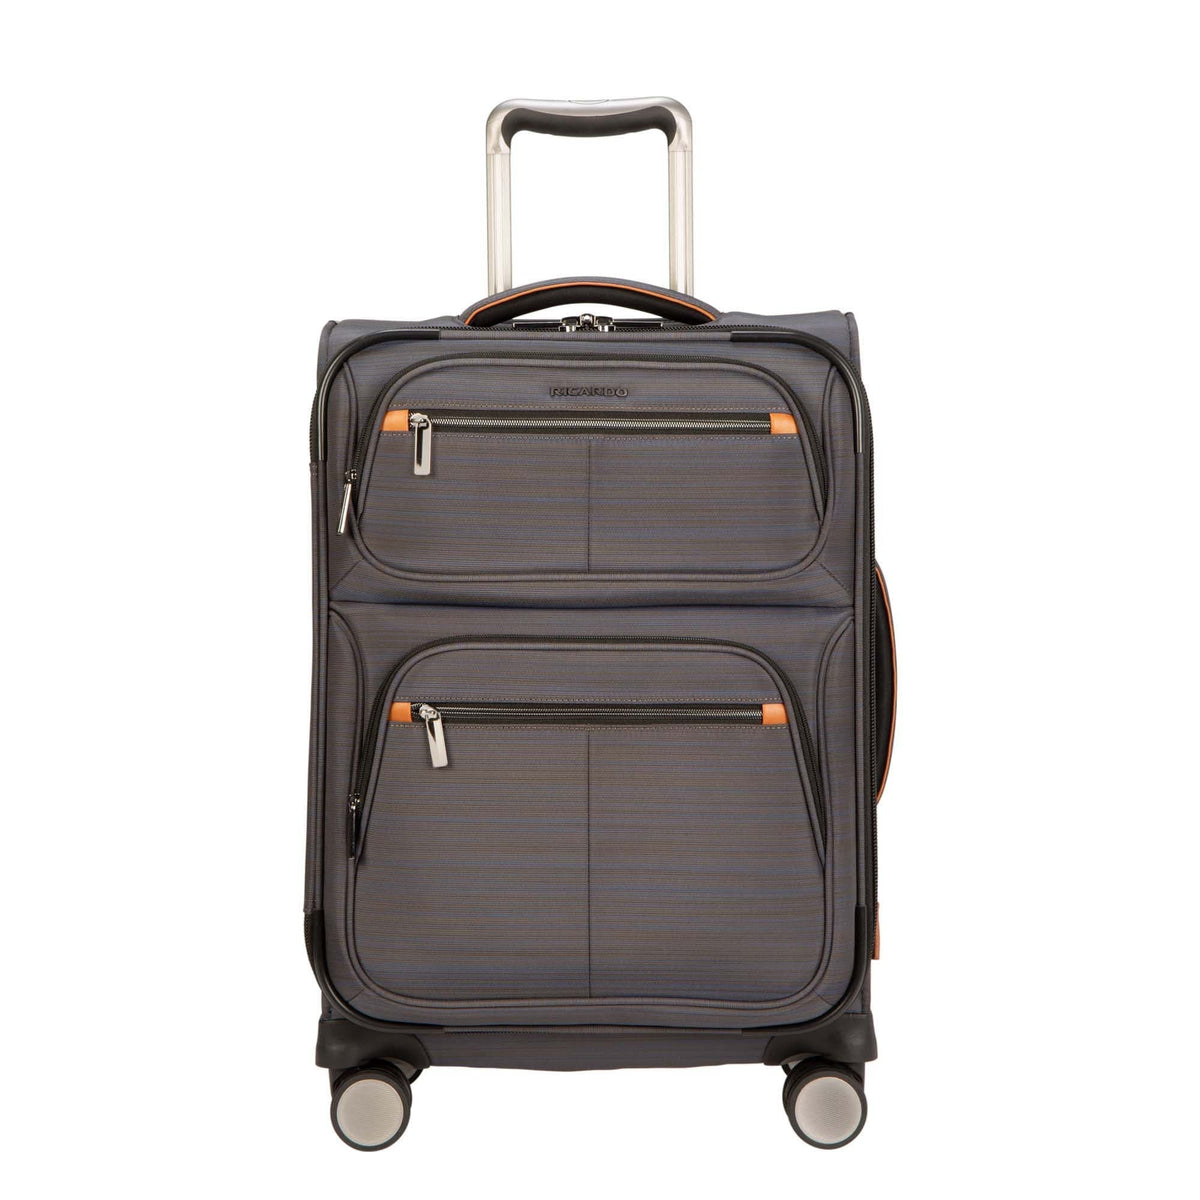 Ricardo Beverly Hills Montecito Softside Carry-On Luggage